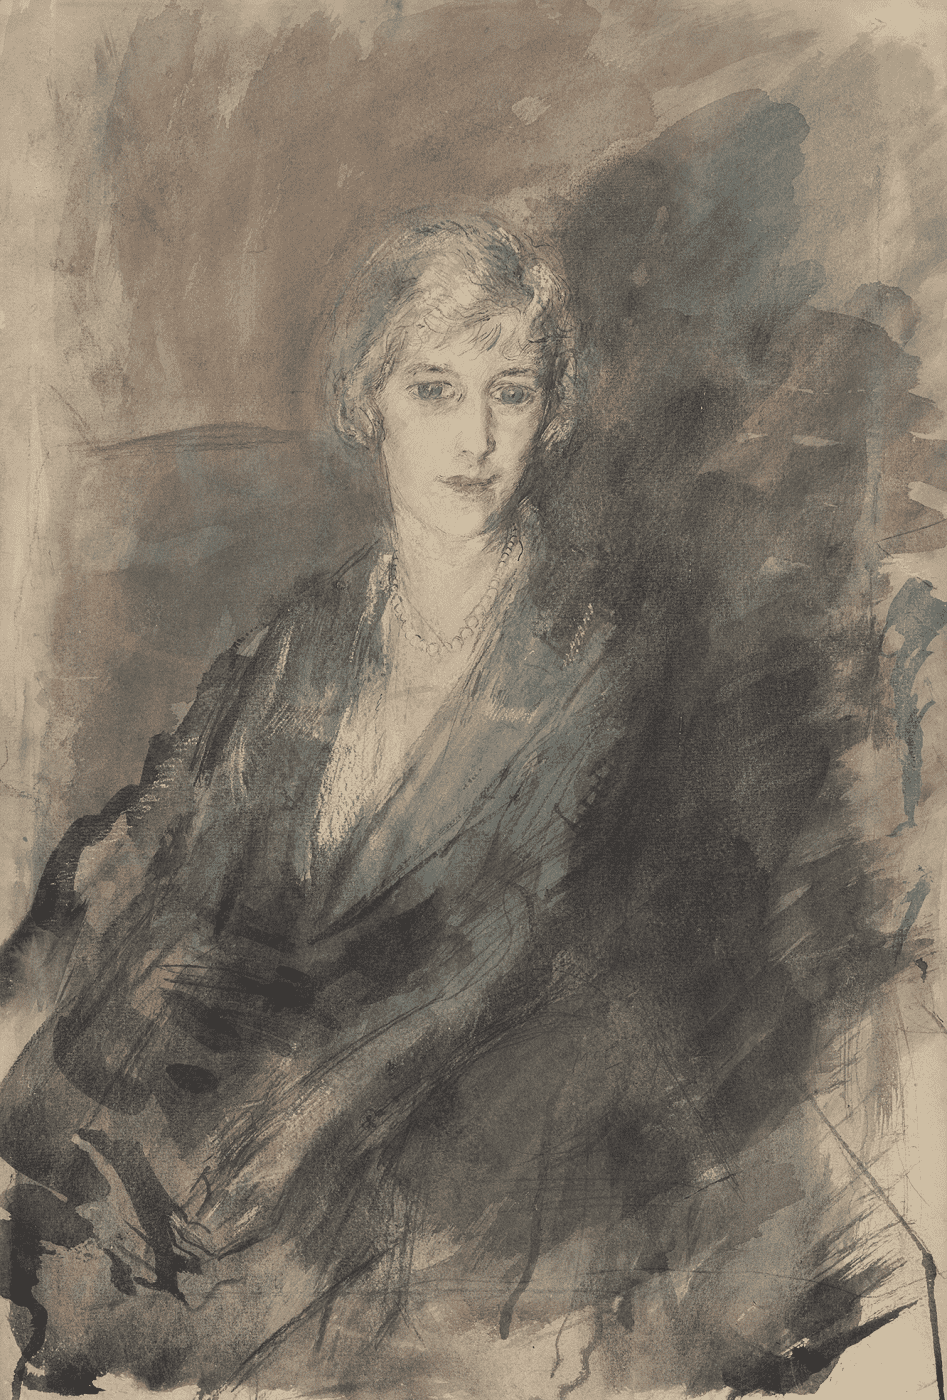 lady Duer Mackay by Ambrose McEvoy, she is here depicted against an abstract background